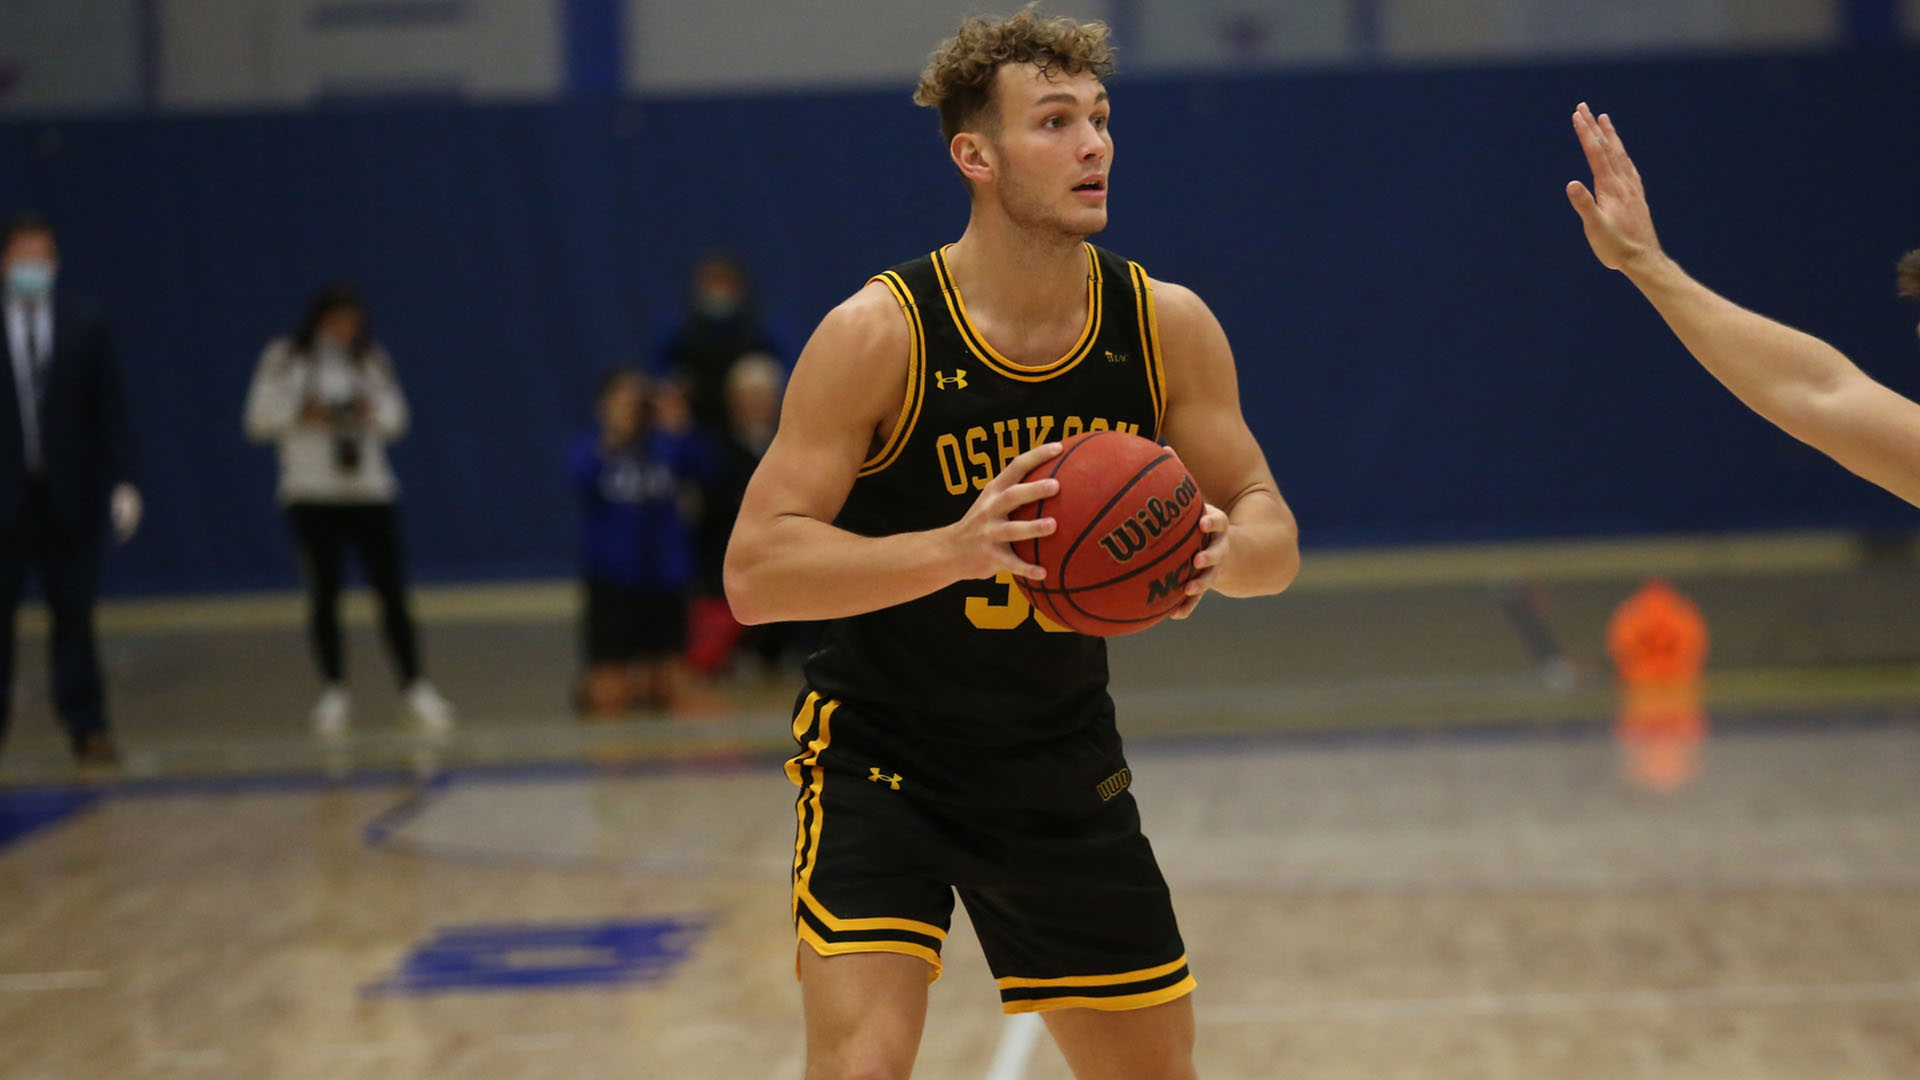 Levi Borchert produced his 10th career double-double with 18 points and 13 rebounds against Illinois Wesleyan University.